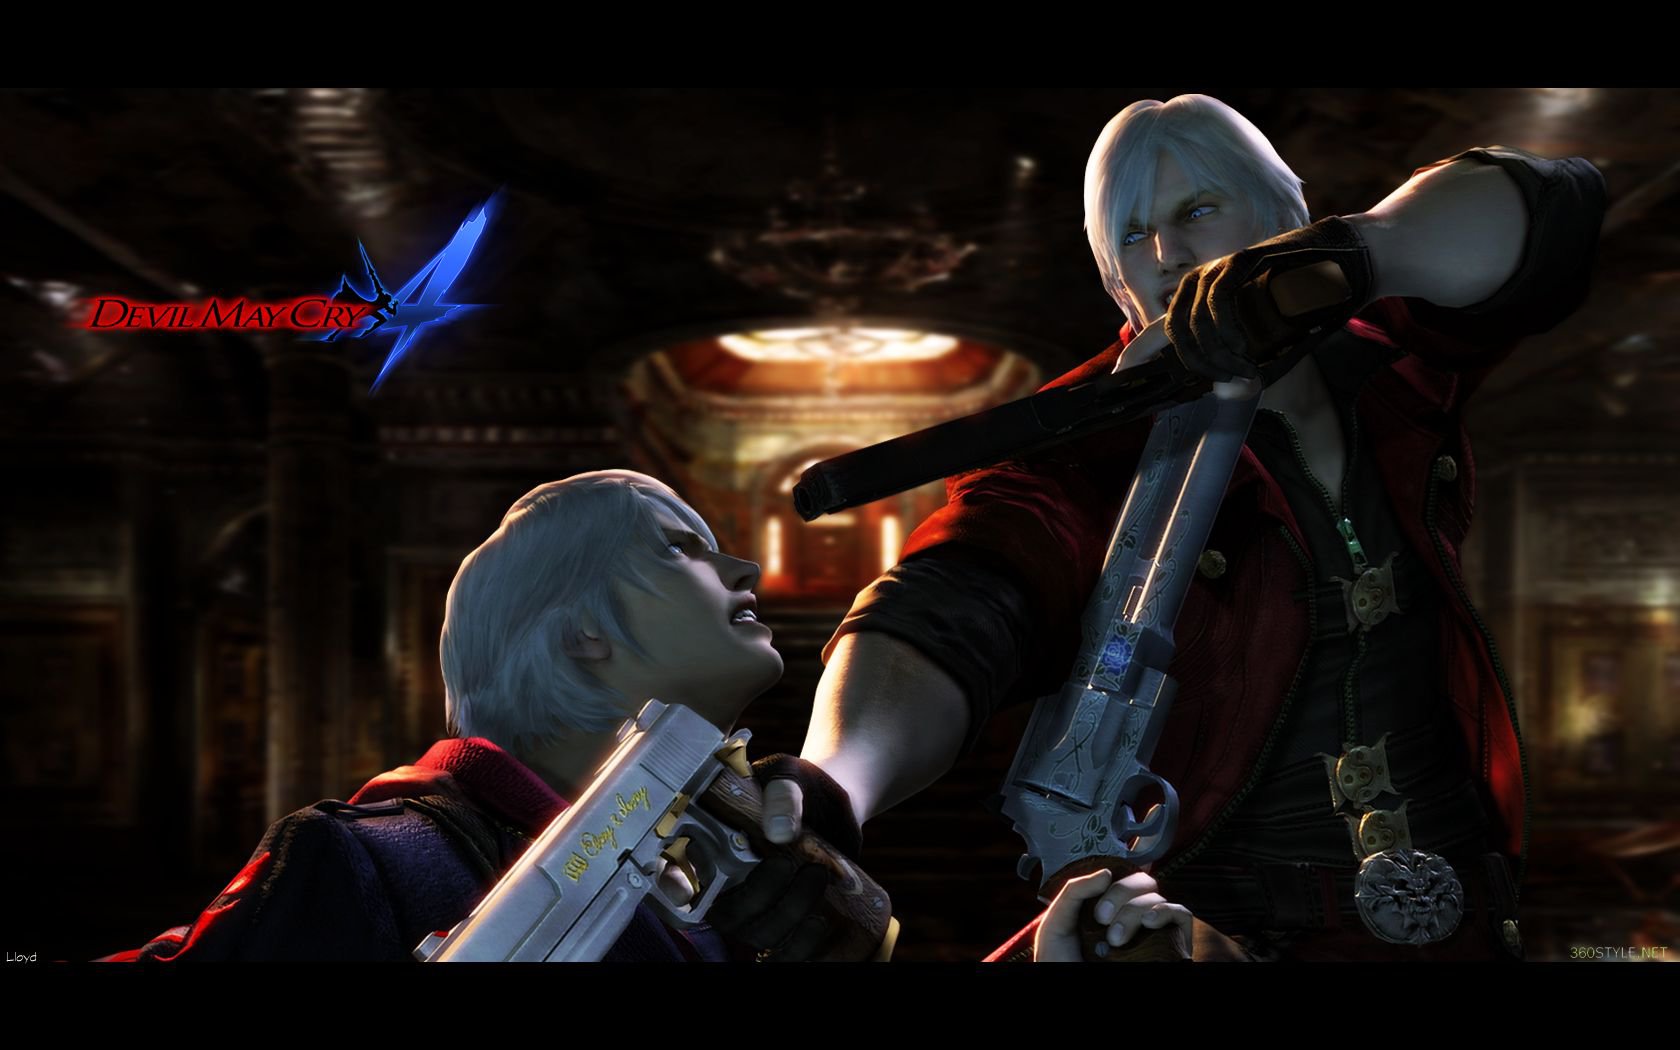 Devil May Cry 4 Wallpaper 2 by igotgame1075 1680x1050